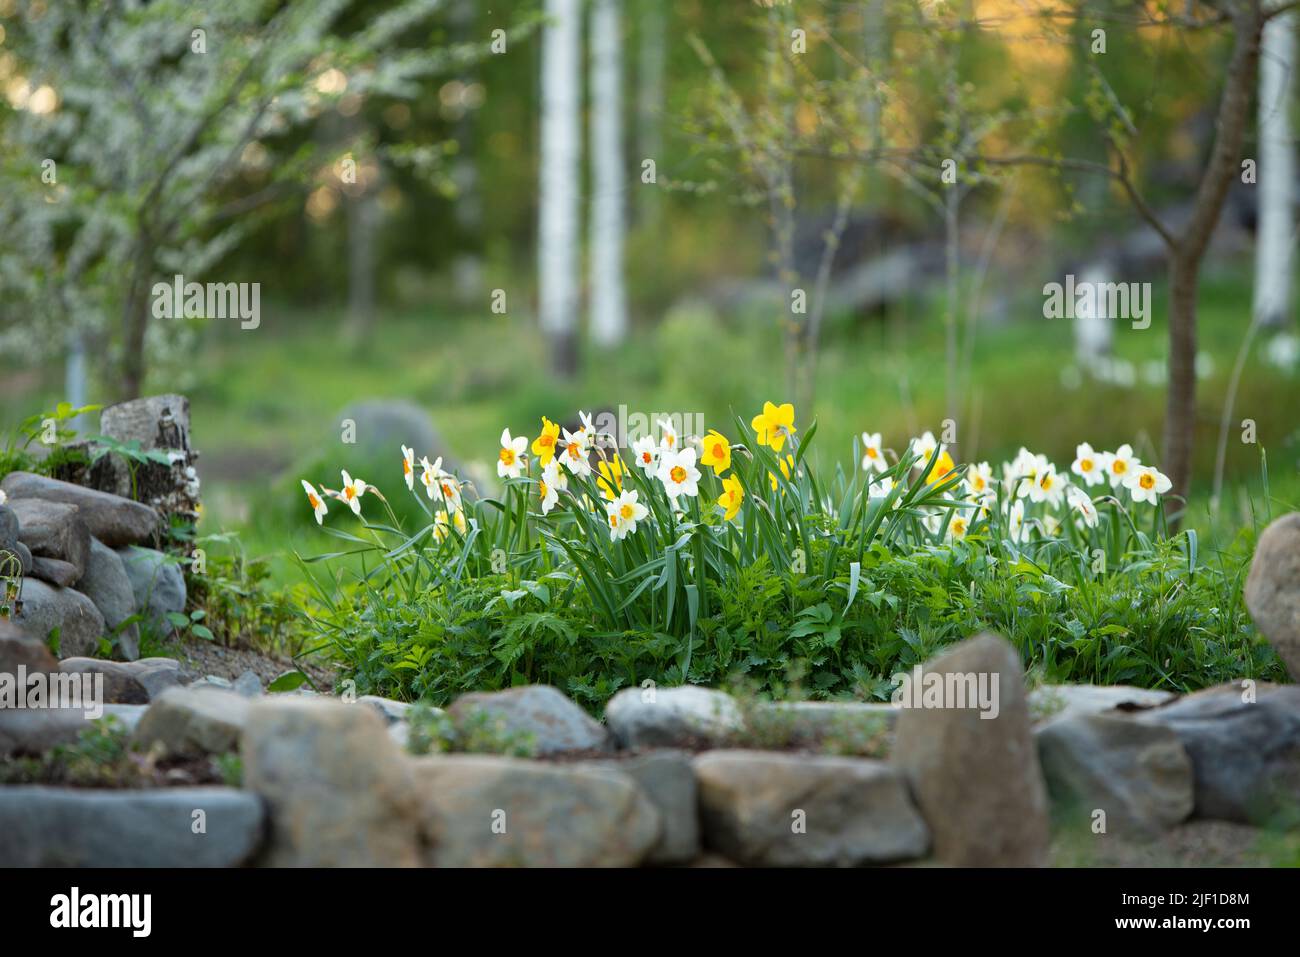 White daffodils, Poeticus daffodils, Narcissus poeticus Actaea, flowers in springtime. Blurred, bokeh background. Stock Photo